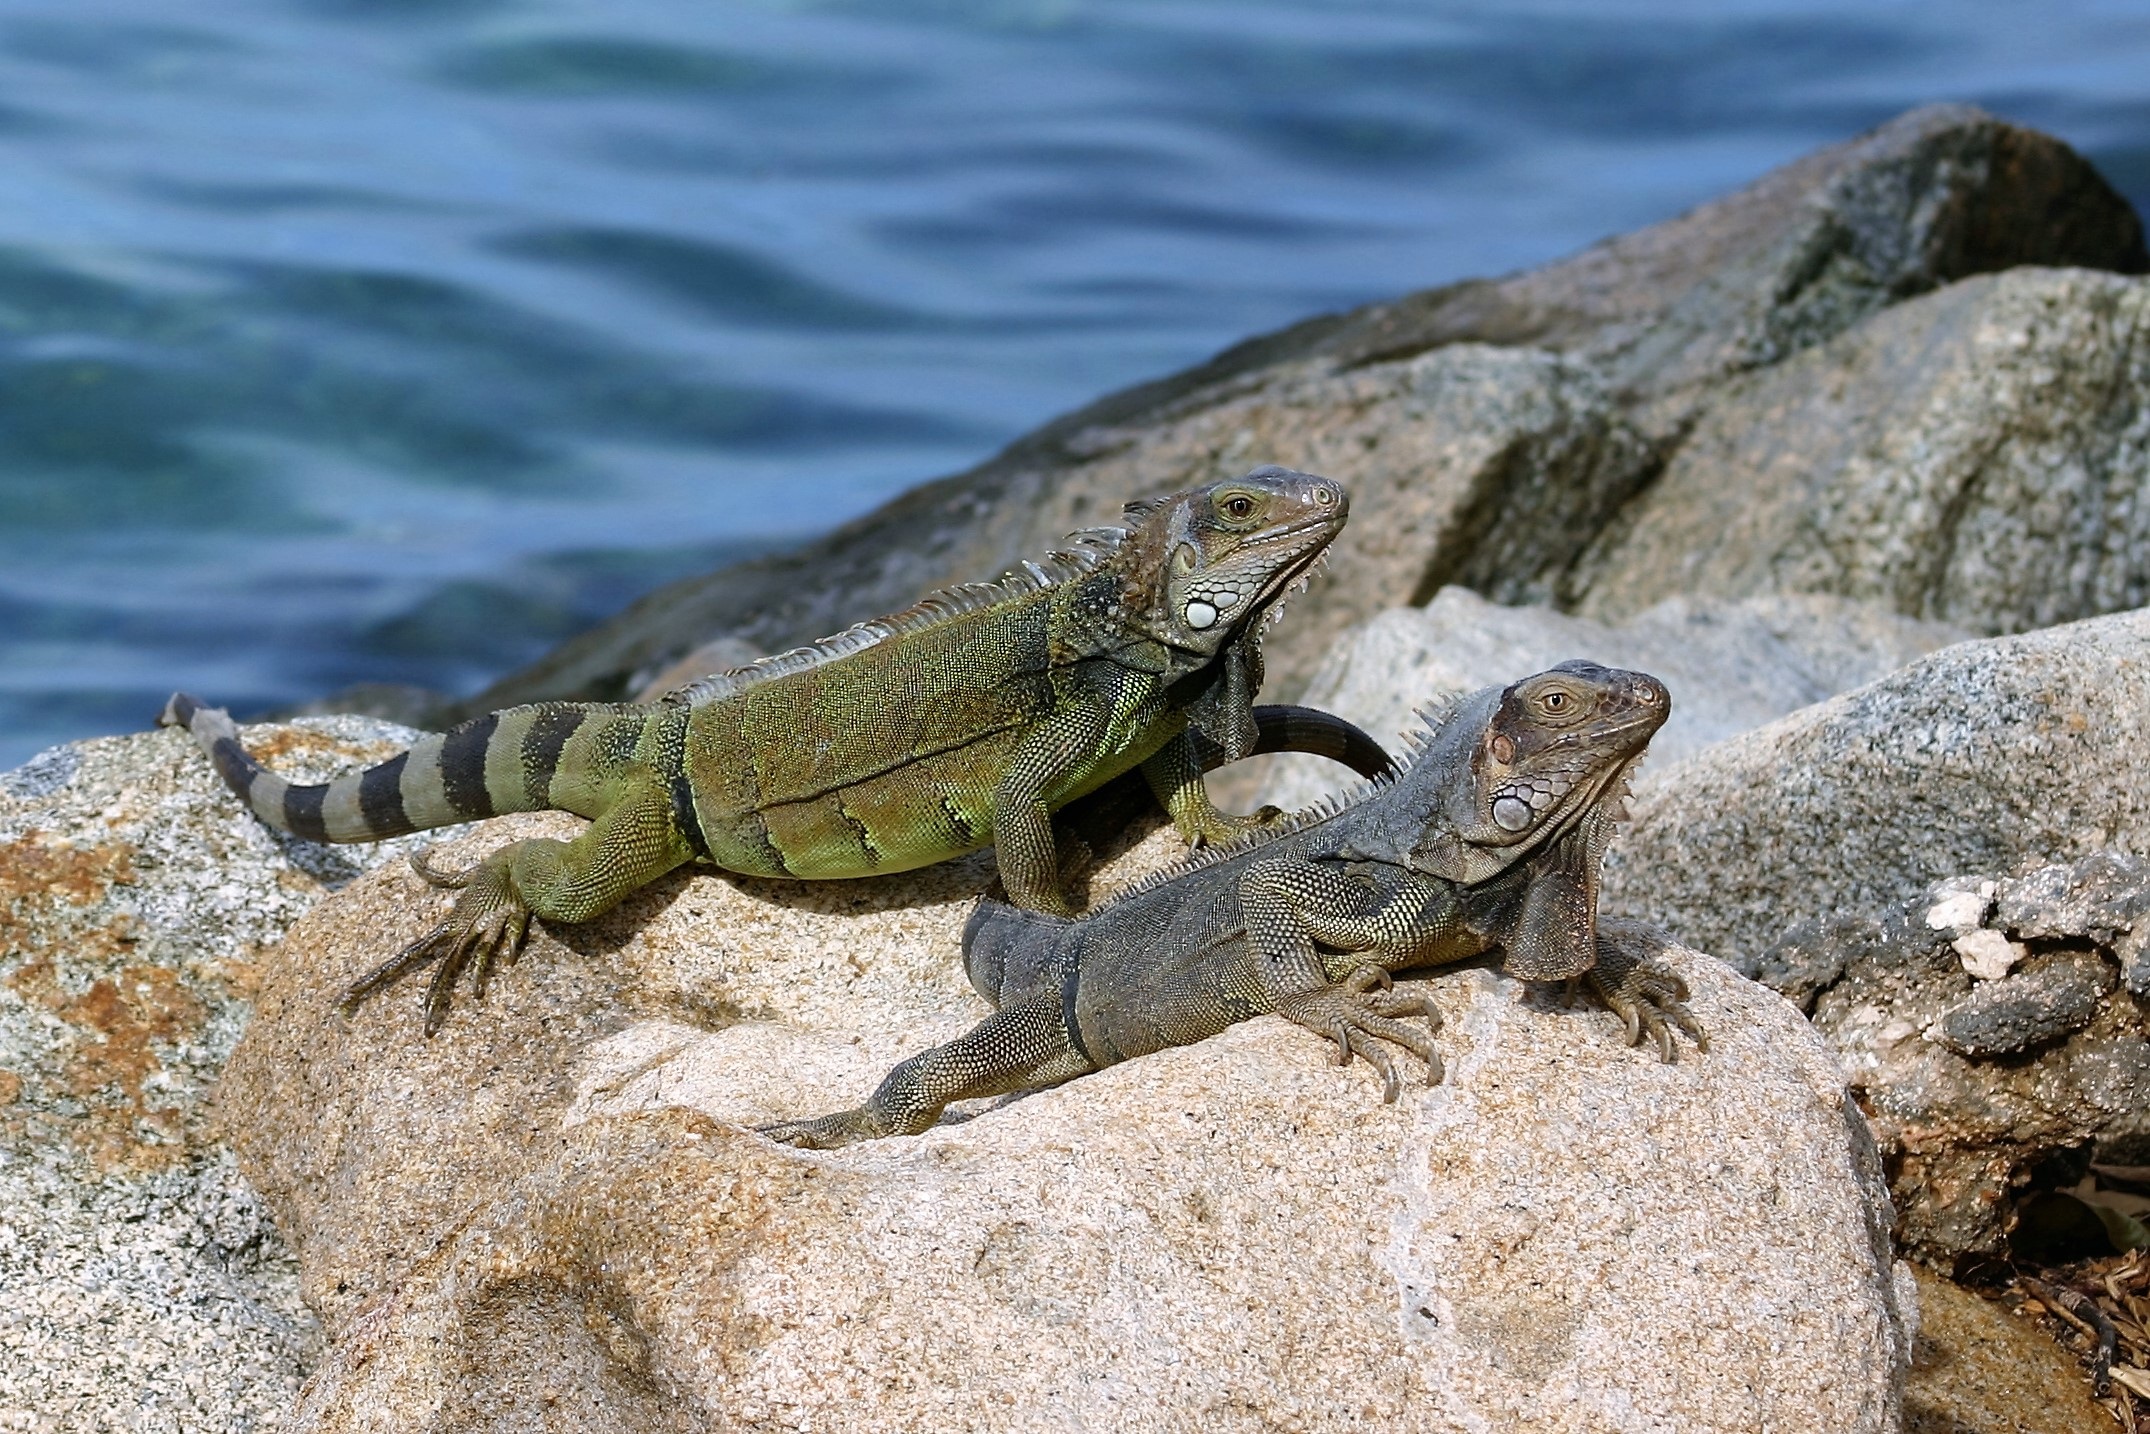 Iguanas sitting in the sun in the caribbean by antoinese0